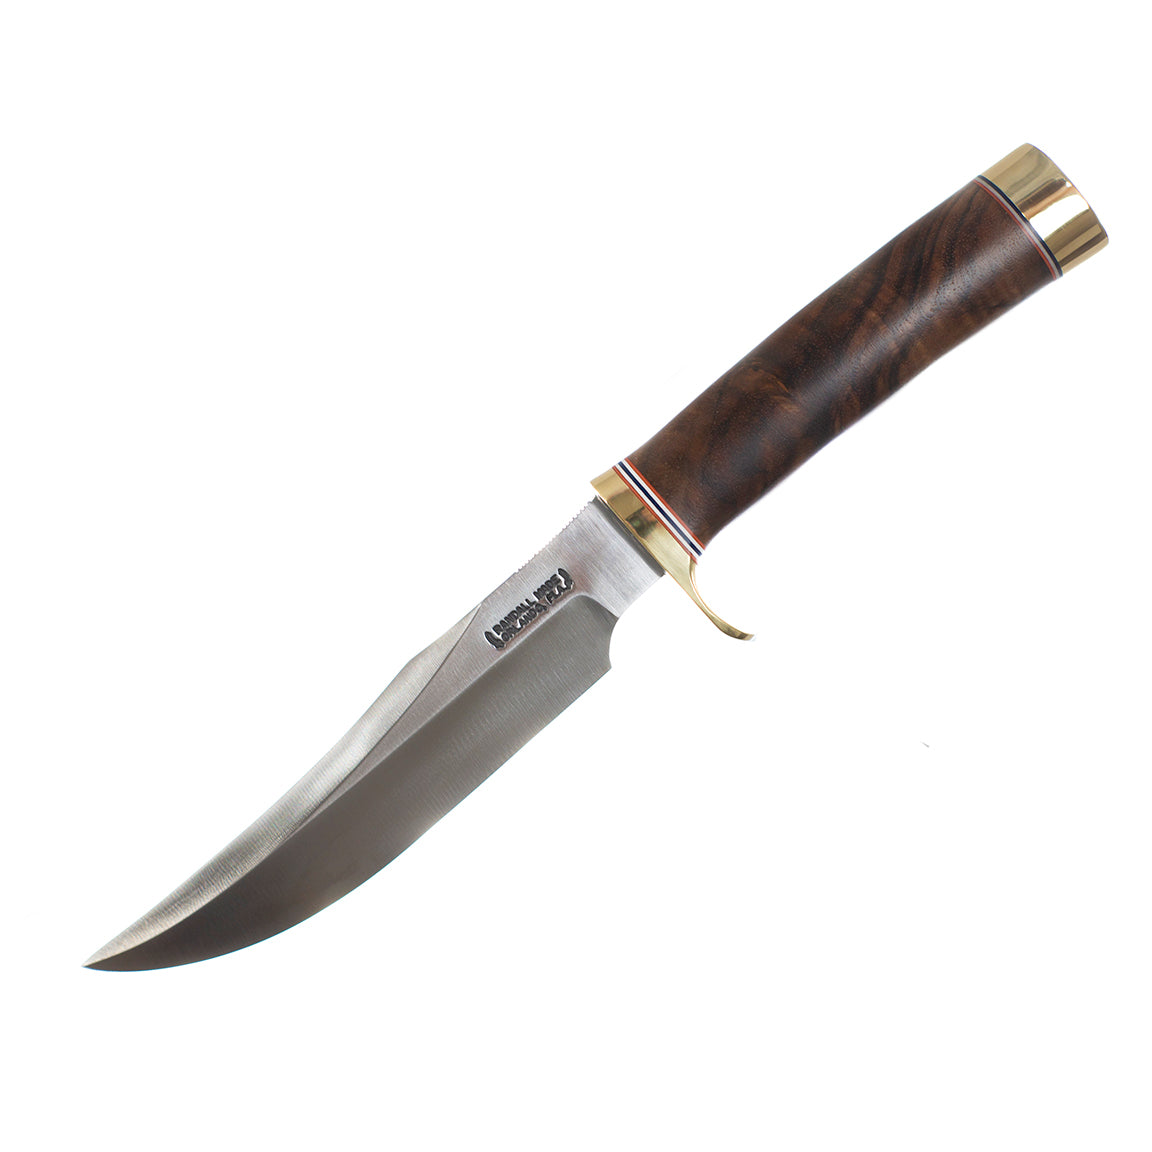 Randall Made 12-6 Little Bear Bowie Walnut-Knives & Tools-Kevin's Fine Outdoor Gear & Apparel